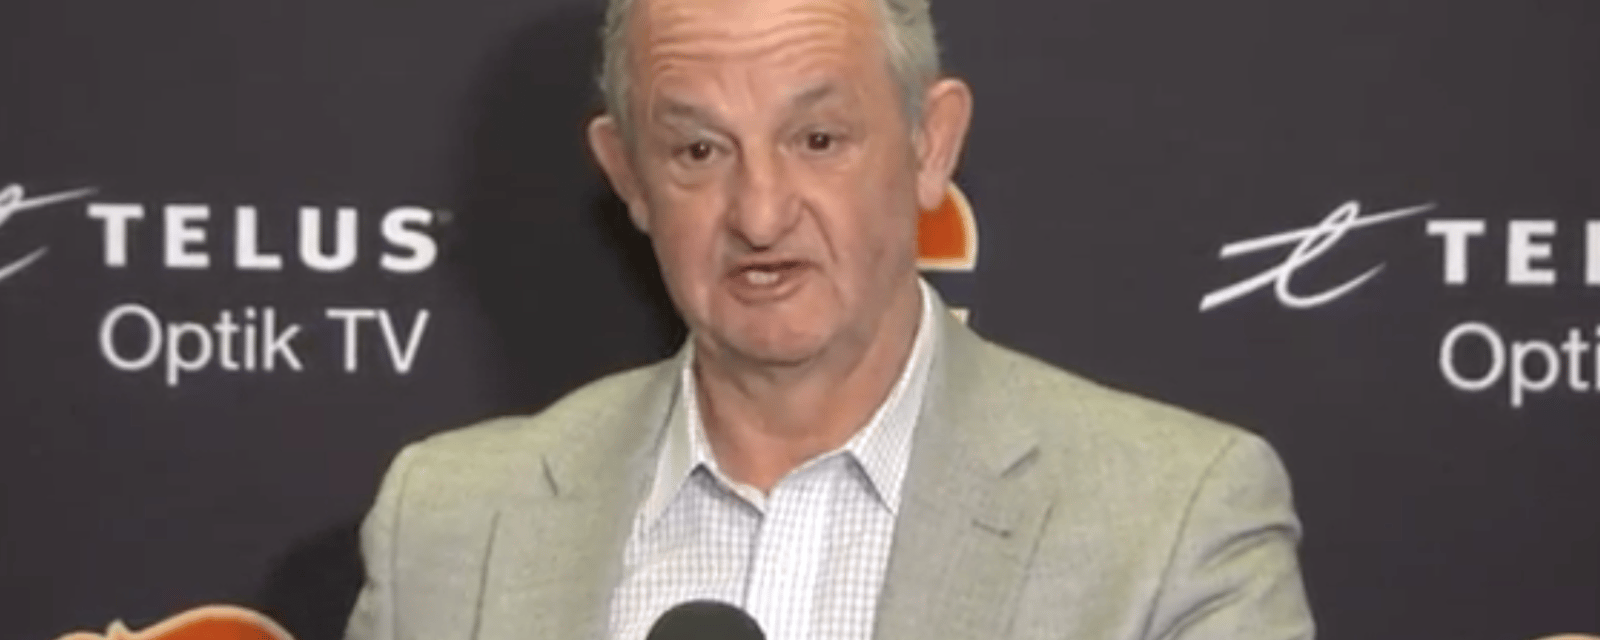 Numbers prove Darryl Sutter wrong about NHL favoring Leafs 